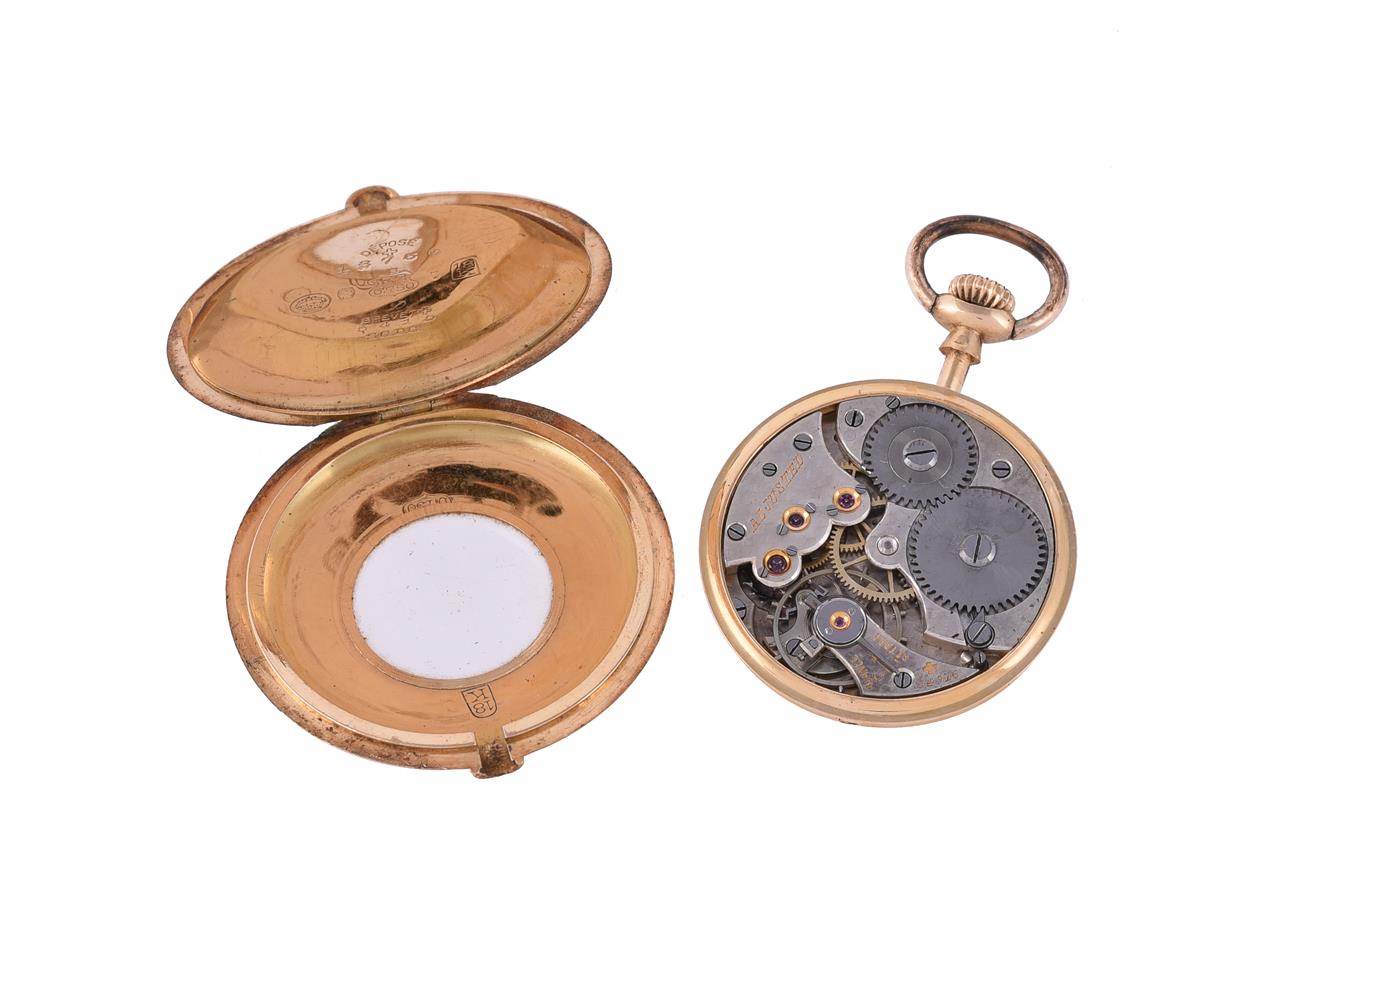 UNSIGNED, AN 18 CARAT GOLD KEYLESS WIND FOB WATCH - Image 3 of 5